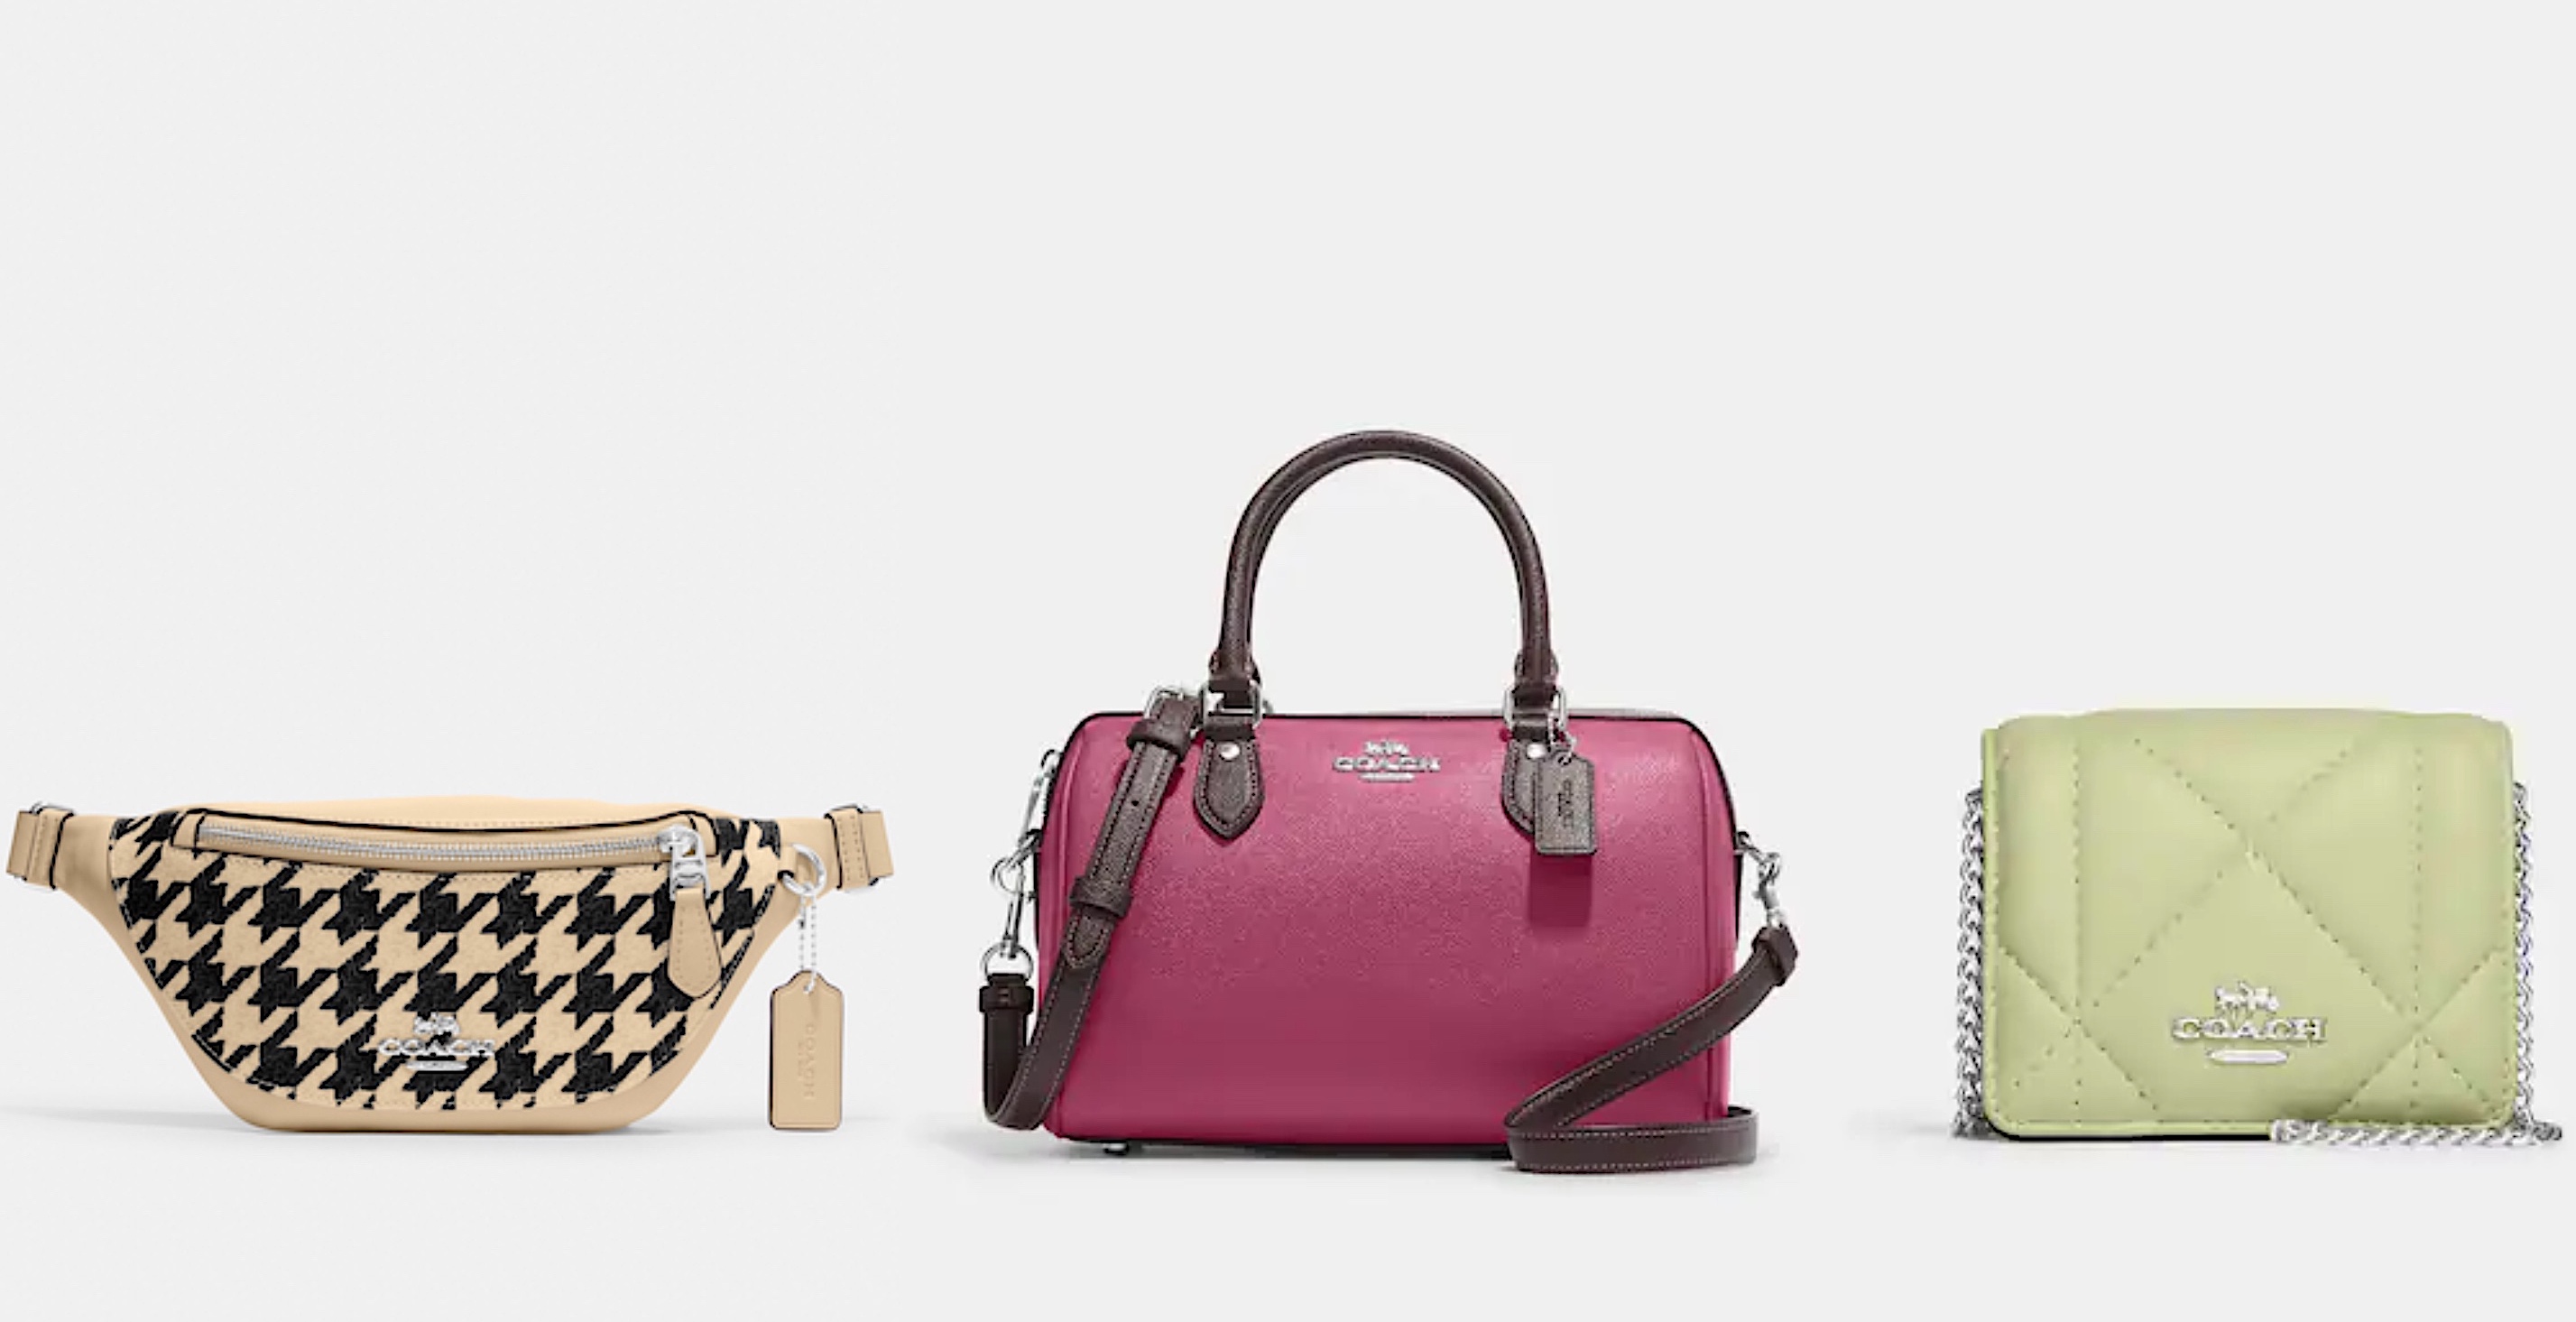 New Arrivals: COACH Outlet x Disney Collection Up to 70% Off